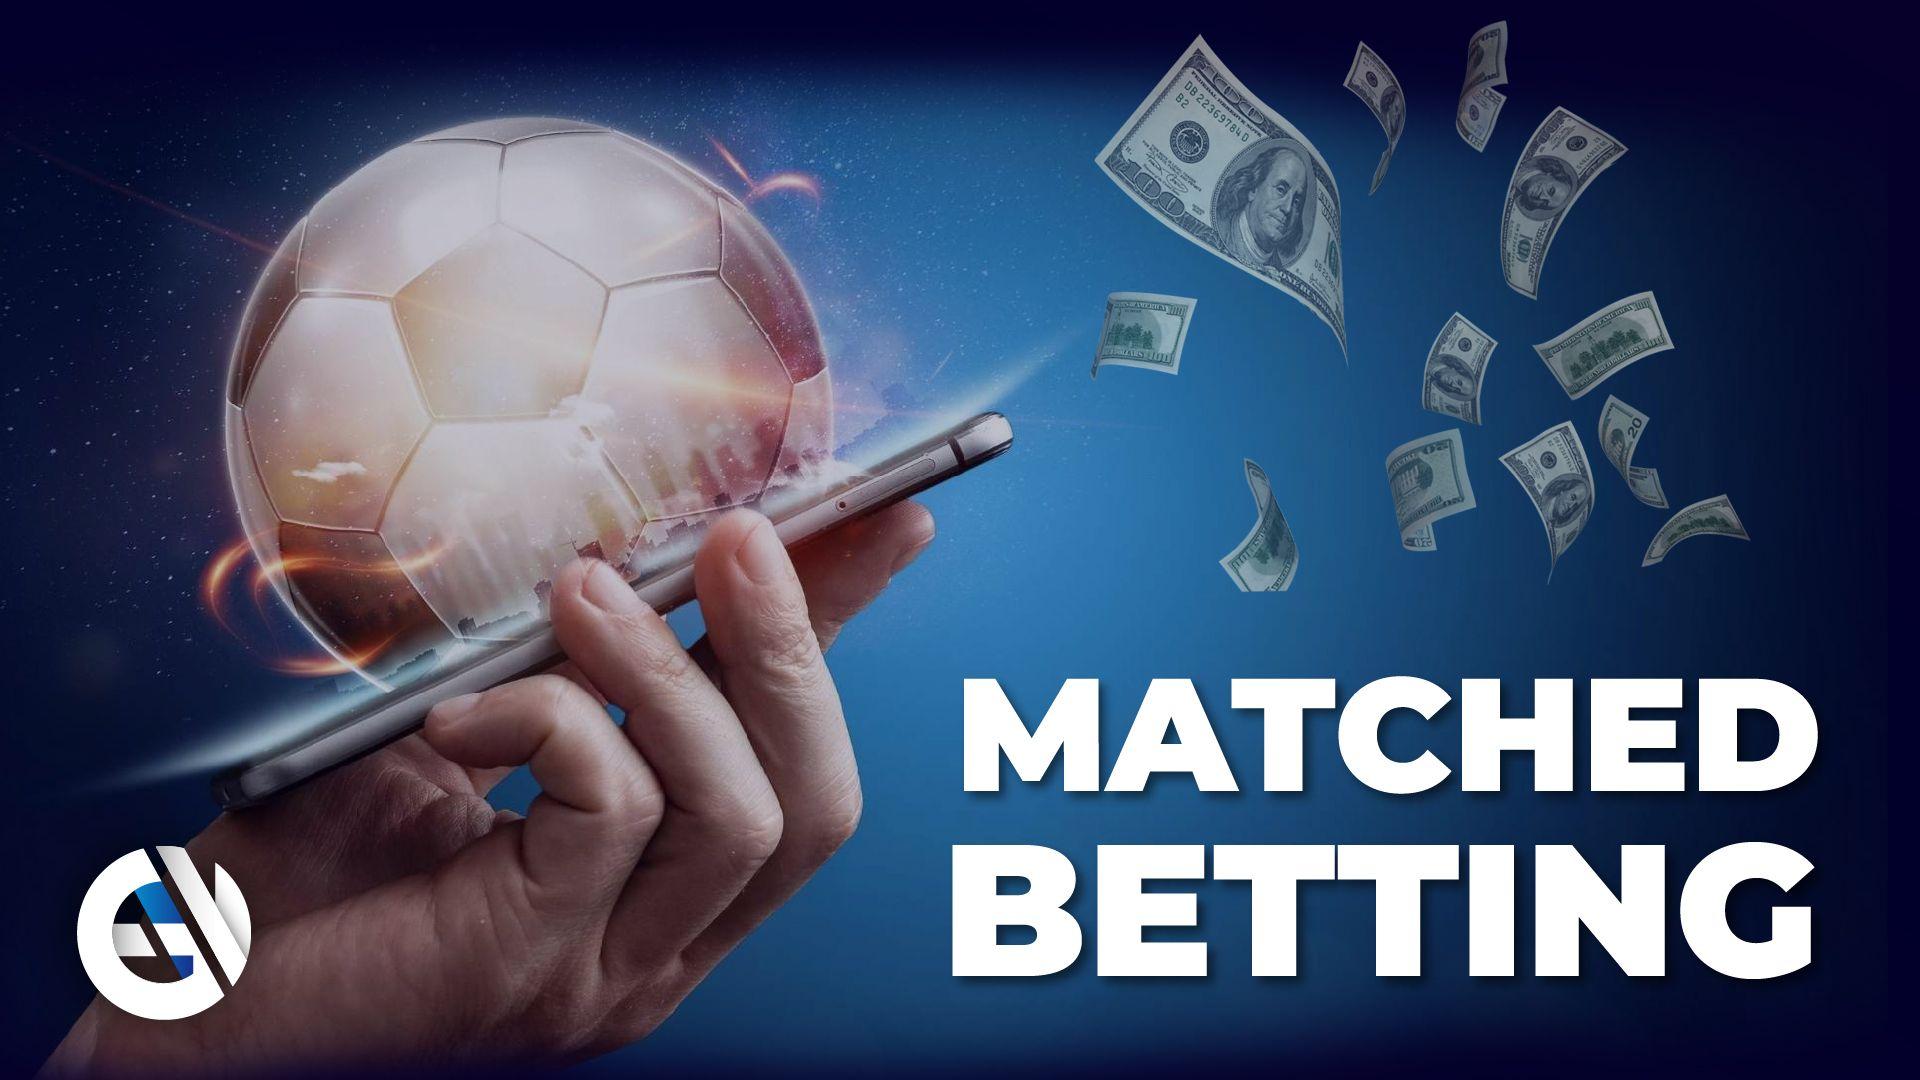 The Difference Between Matched Betting and Gambling